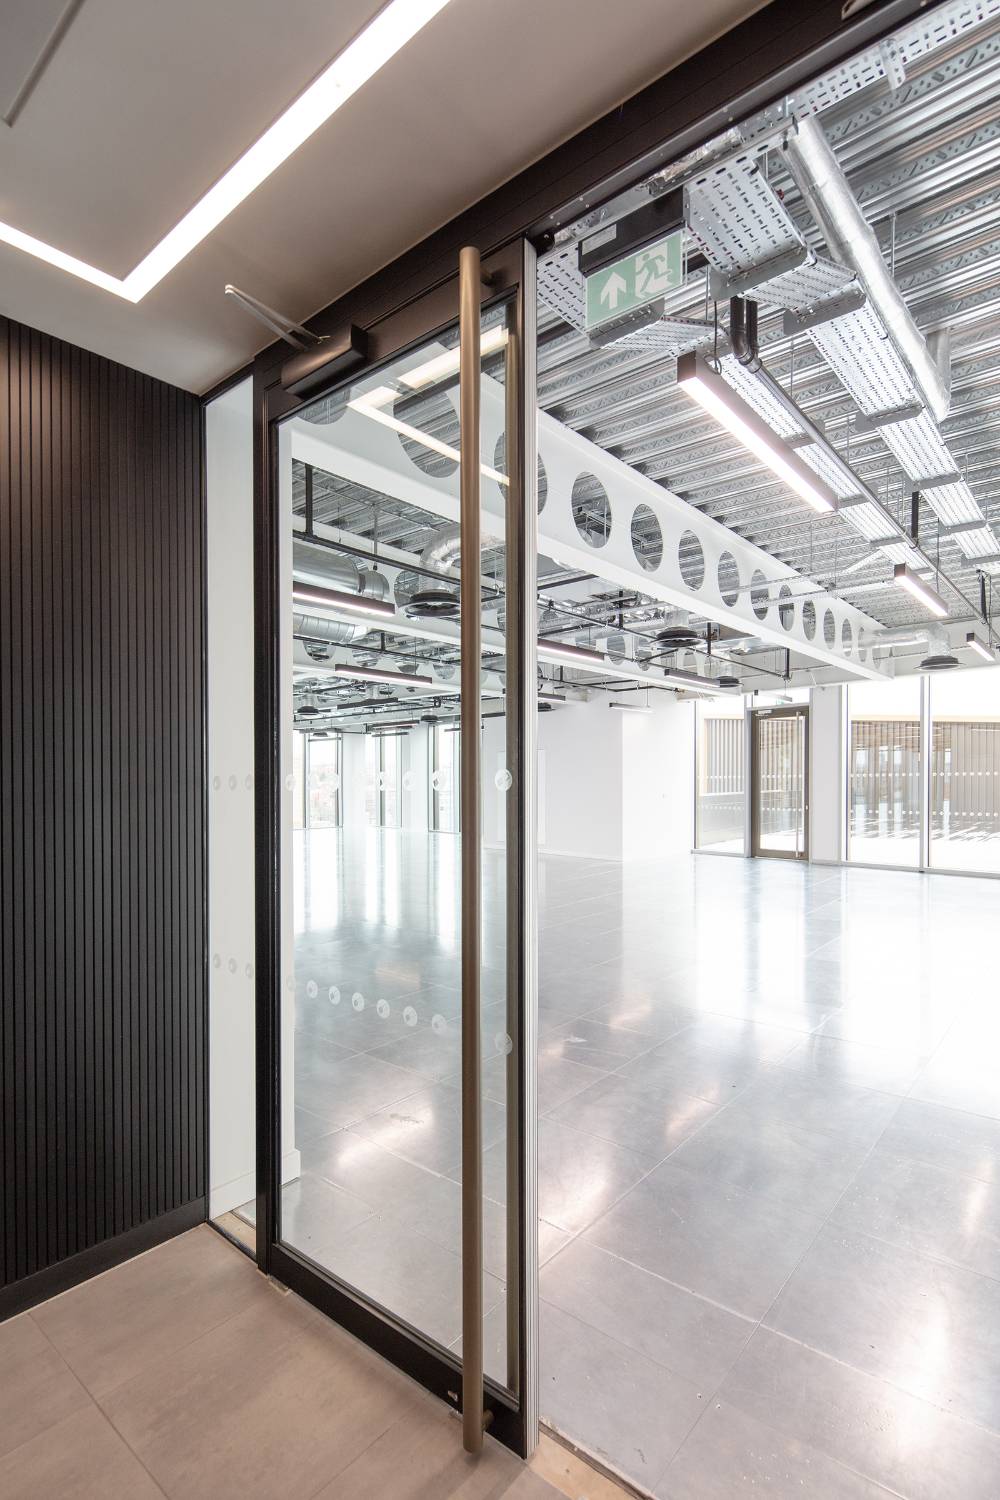 FireTec Ei60 Single Glazed Partition System (Micro Channel) and Doorset